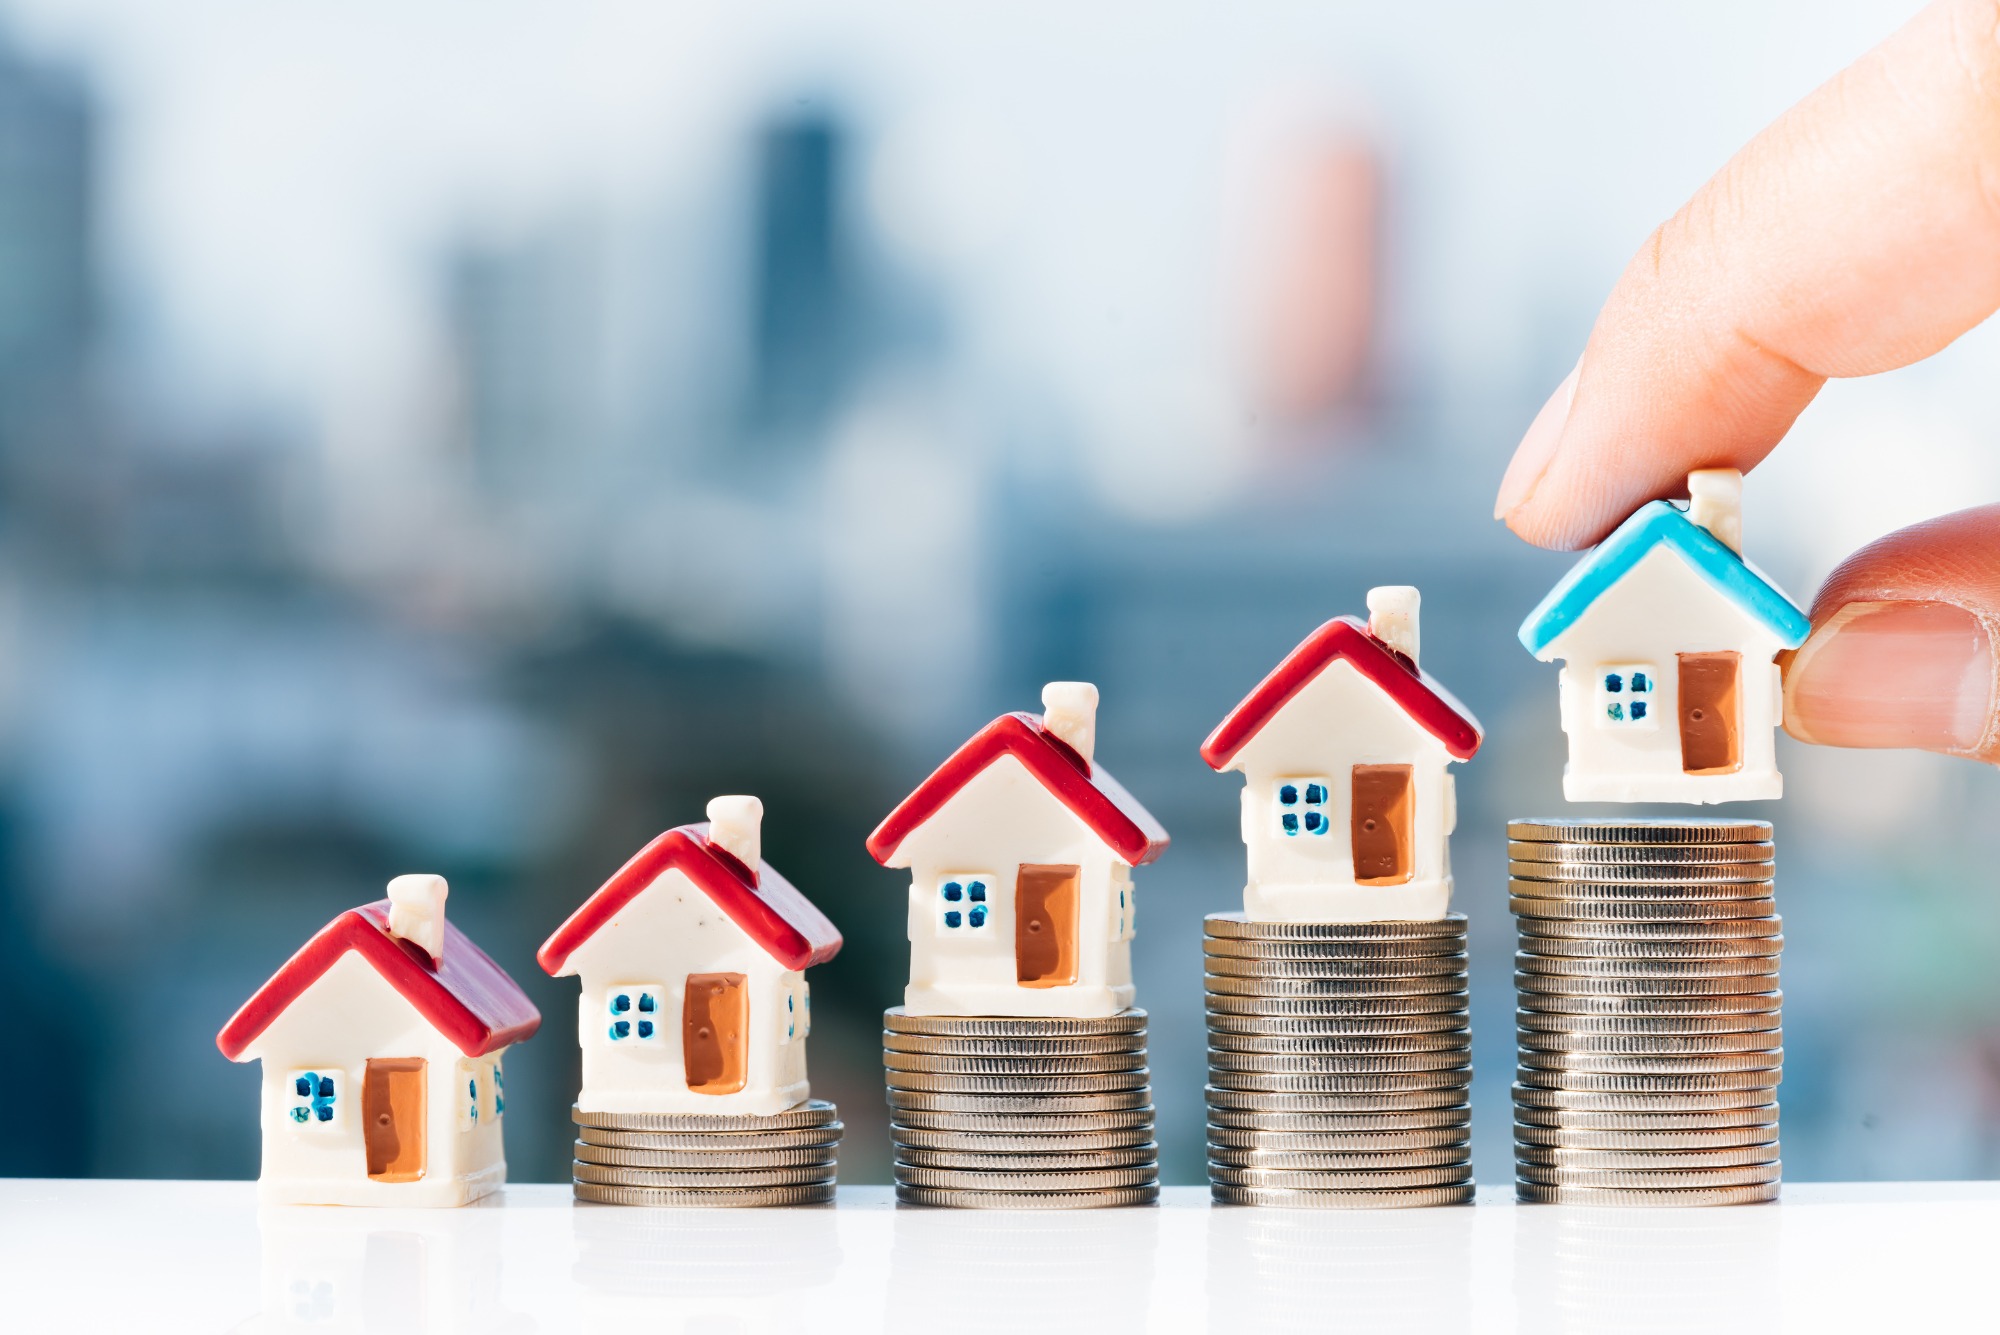 How To Invest On Real Estate